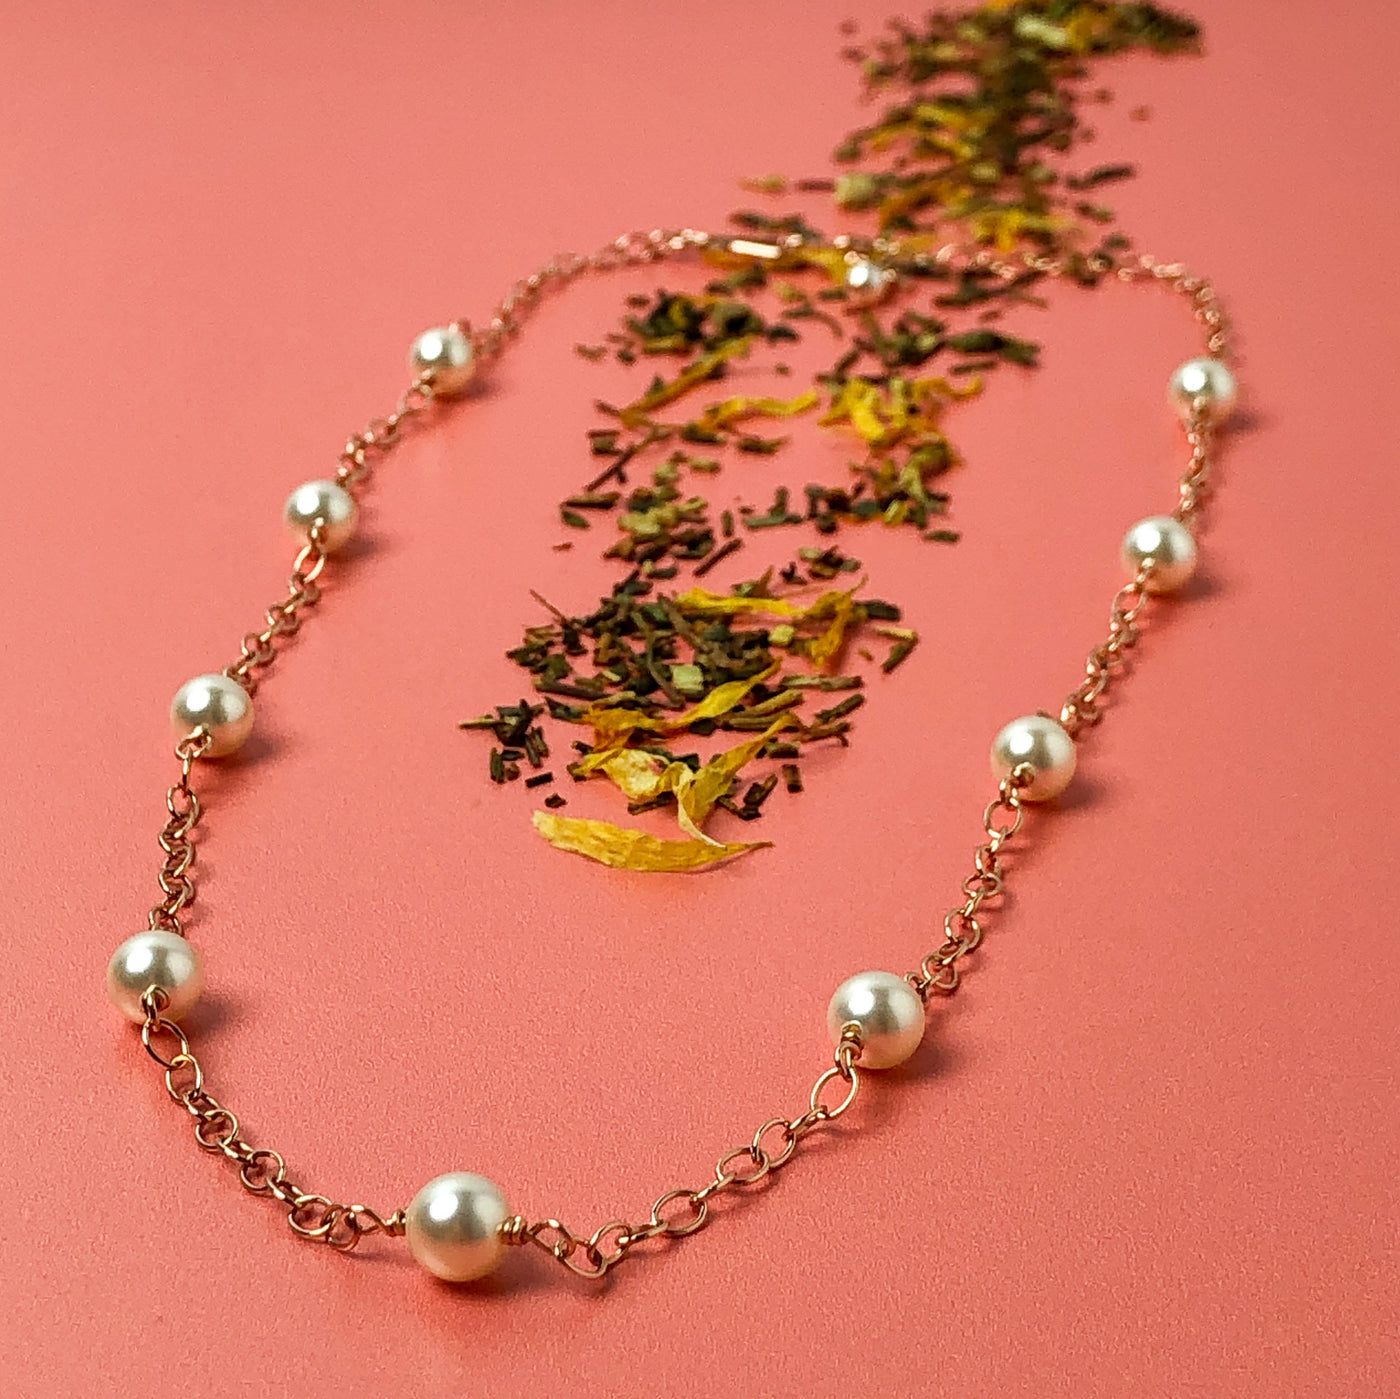 Inspired by the pearl and gold "gumball" necklace Madame VP- Kamala wears.  A faint golden-pink tone softens the white undertones of 6mm Swarovski crystal's light cream rose pearl, giving it a slightly vintage air. This subtle shade delivers a hint of shimmer and sophistication. Diagonal view